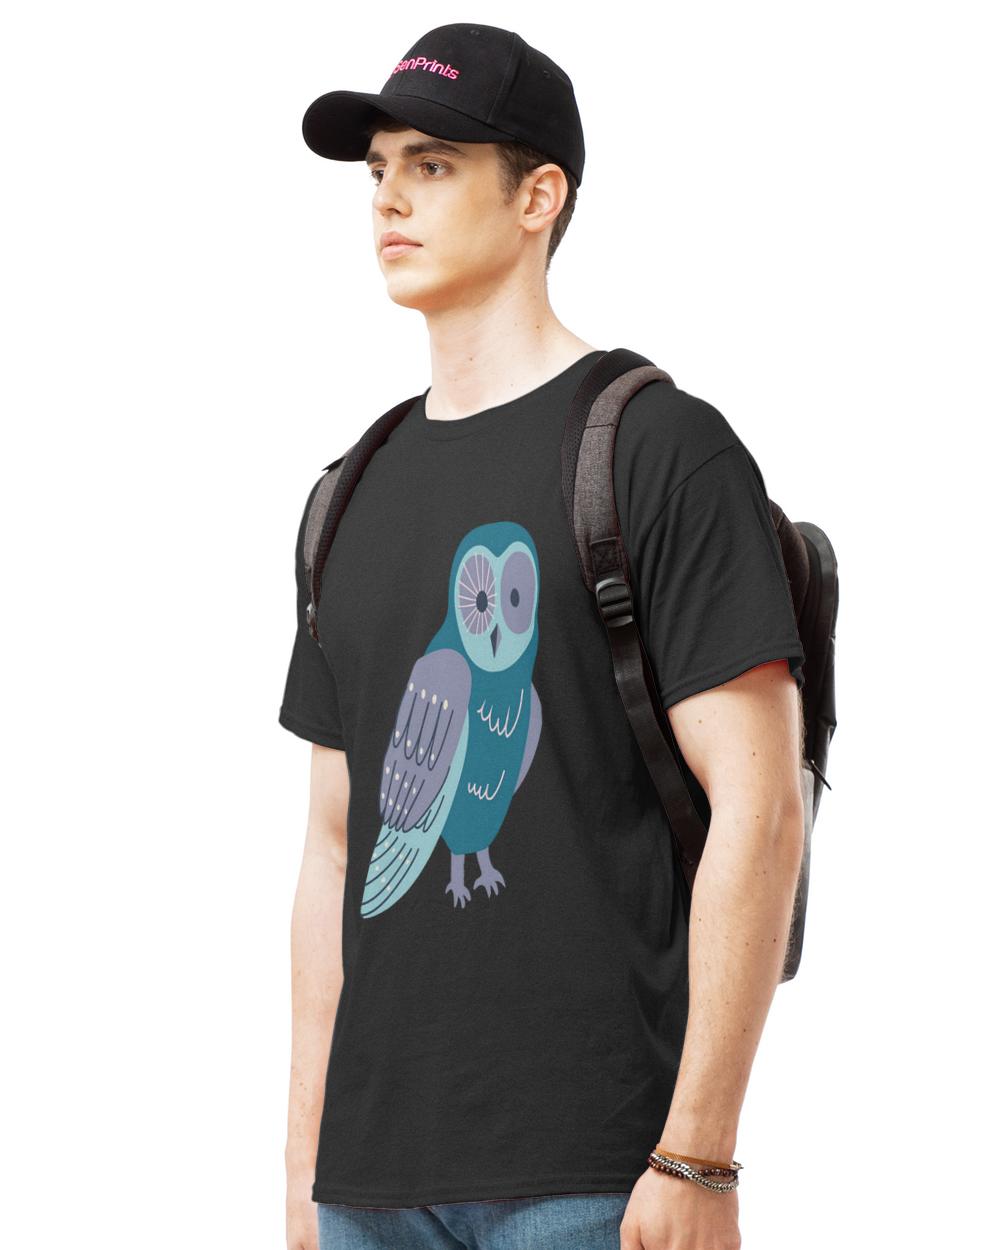 Owl Design T- Shirt Stylized Owl - graphic owl design by Cecca Designs T- Shirt